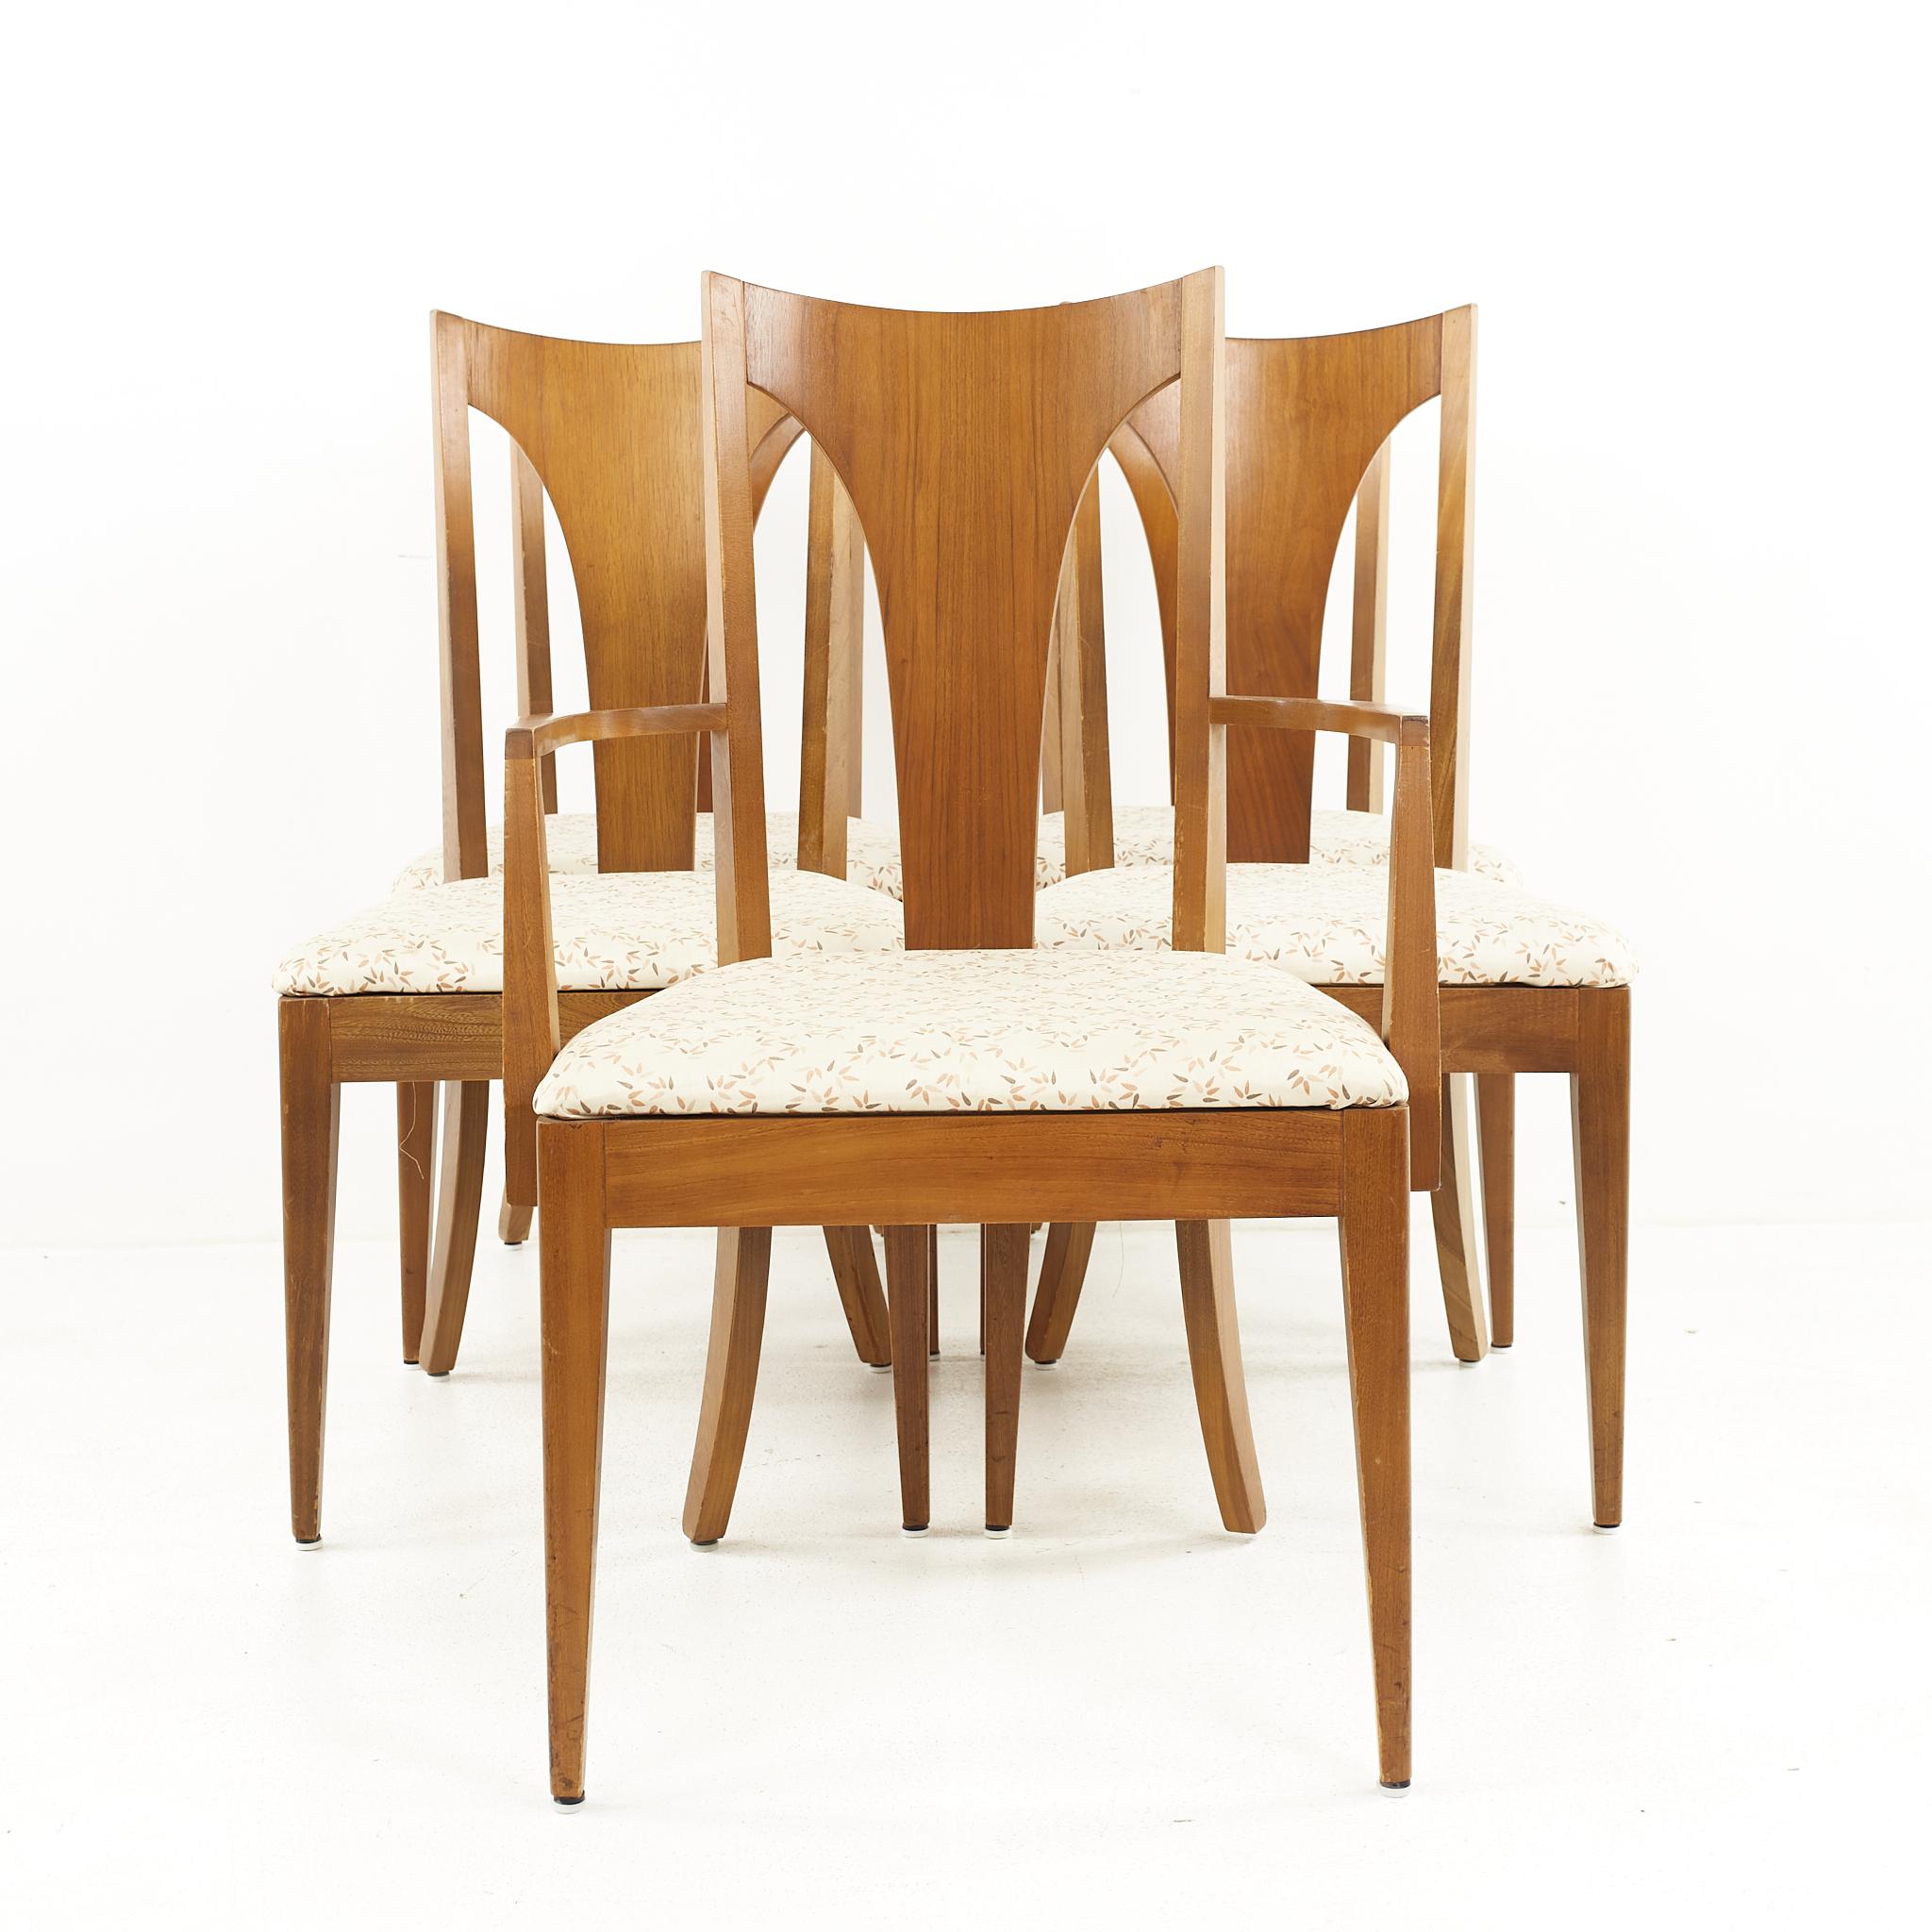 Young Manufacturing mid-century dining chairs - set of 5.

The captains' chair measures: 23.5 wide x 20.5 deep x 37.25 high, with a seat height of 18 inches and arm height of 25.25 inches.
The side chairs measure: 19.5 wide x 20 deep x 37.25